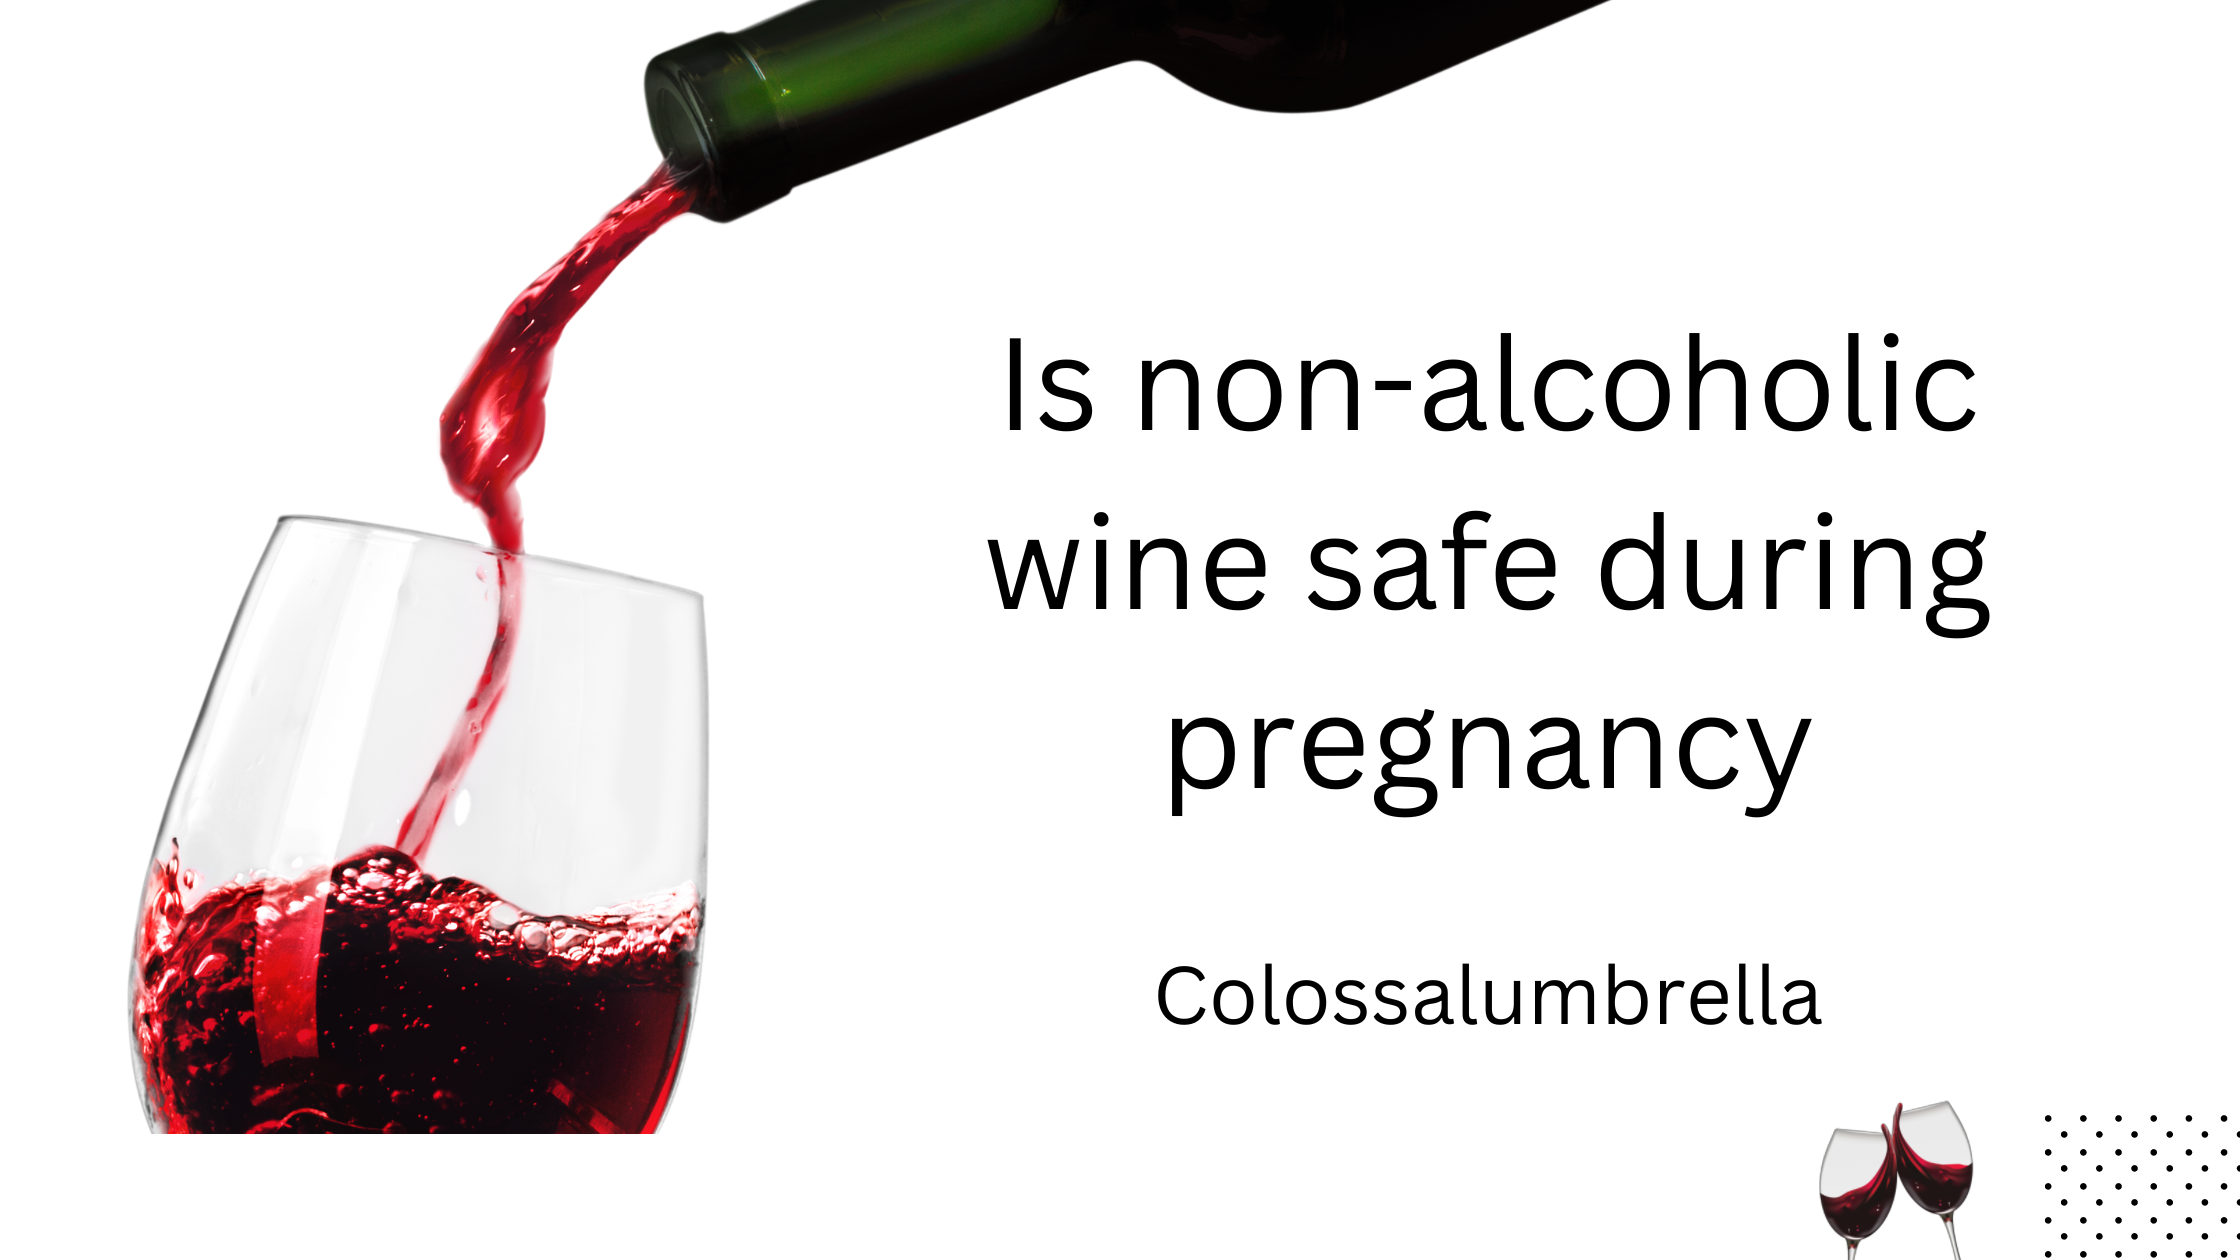 Is non-alcoholic wine safe during pregnancy?